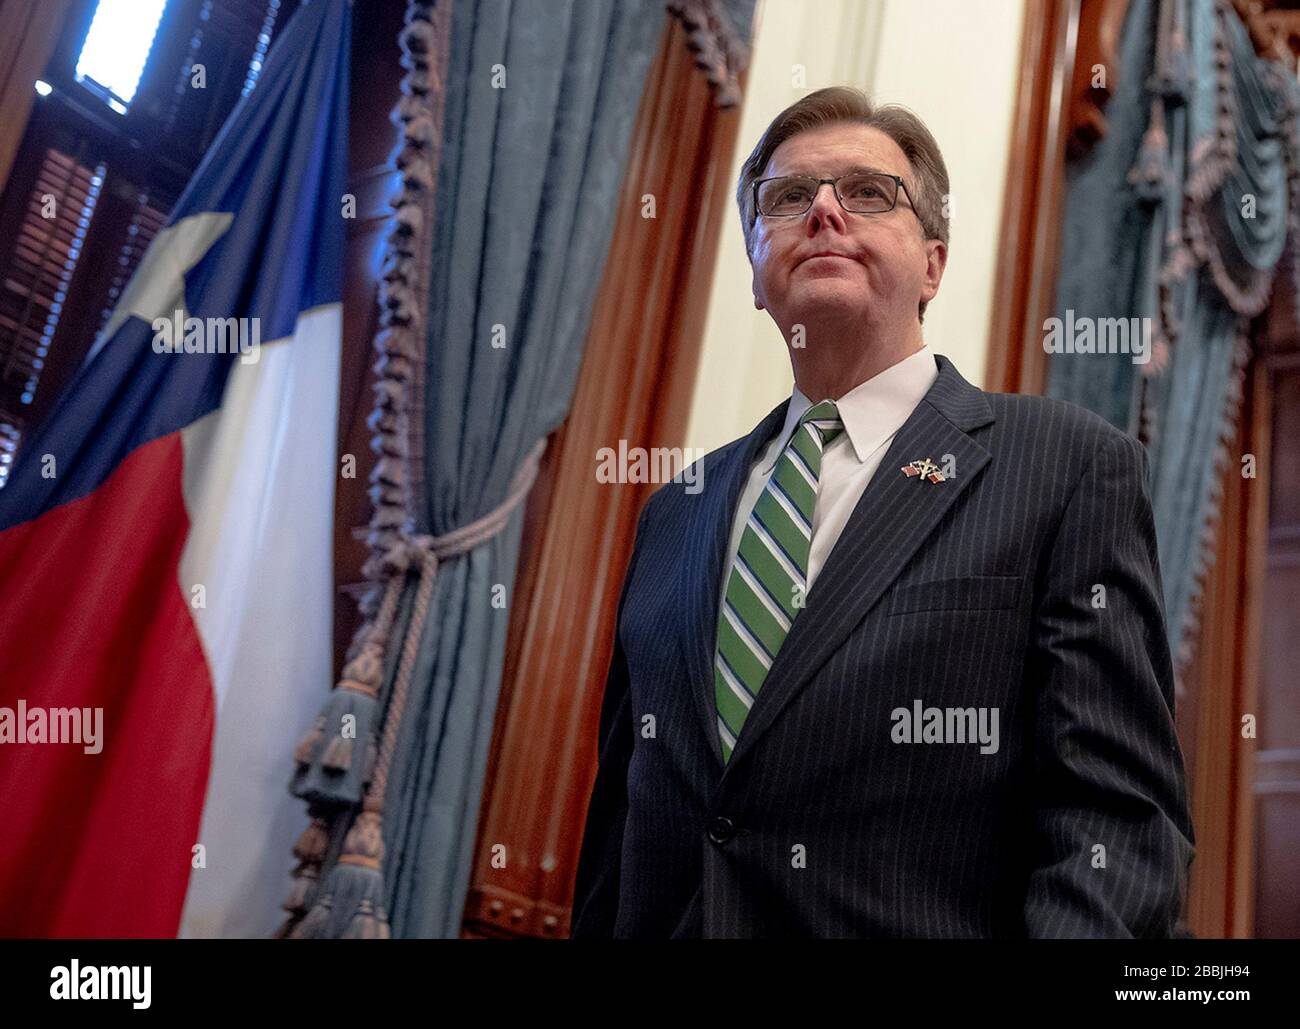 March 31, 2020: Texas Lt. Gov. Dan Patrick exits a press conference at the state Capitol about the state's response to the coronavirus on Tuesday, March 31, 2020, in Austin, Texas. (Credit Image: © Bob Daemmrich/ZUMA Wire) Stock Photo